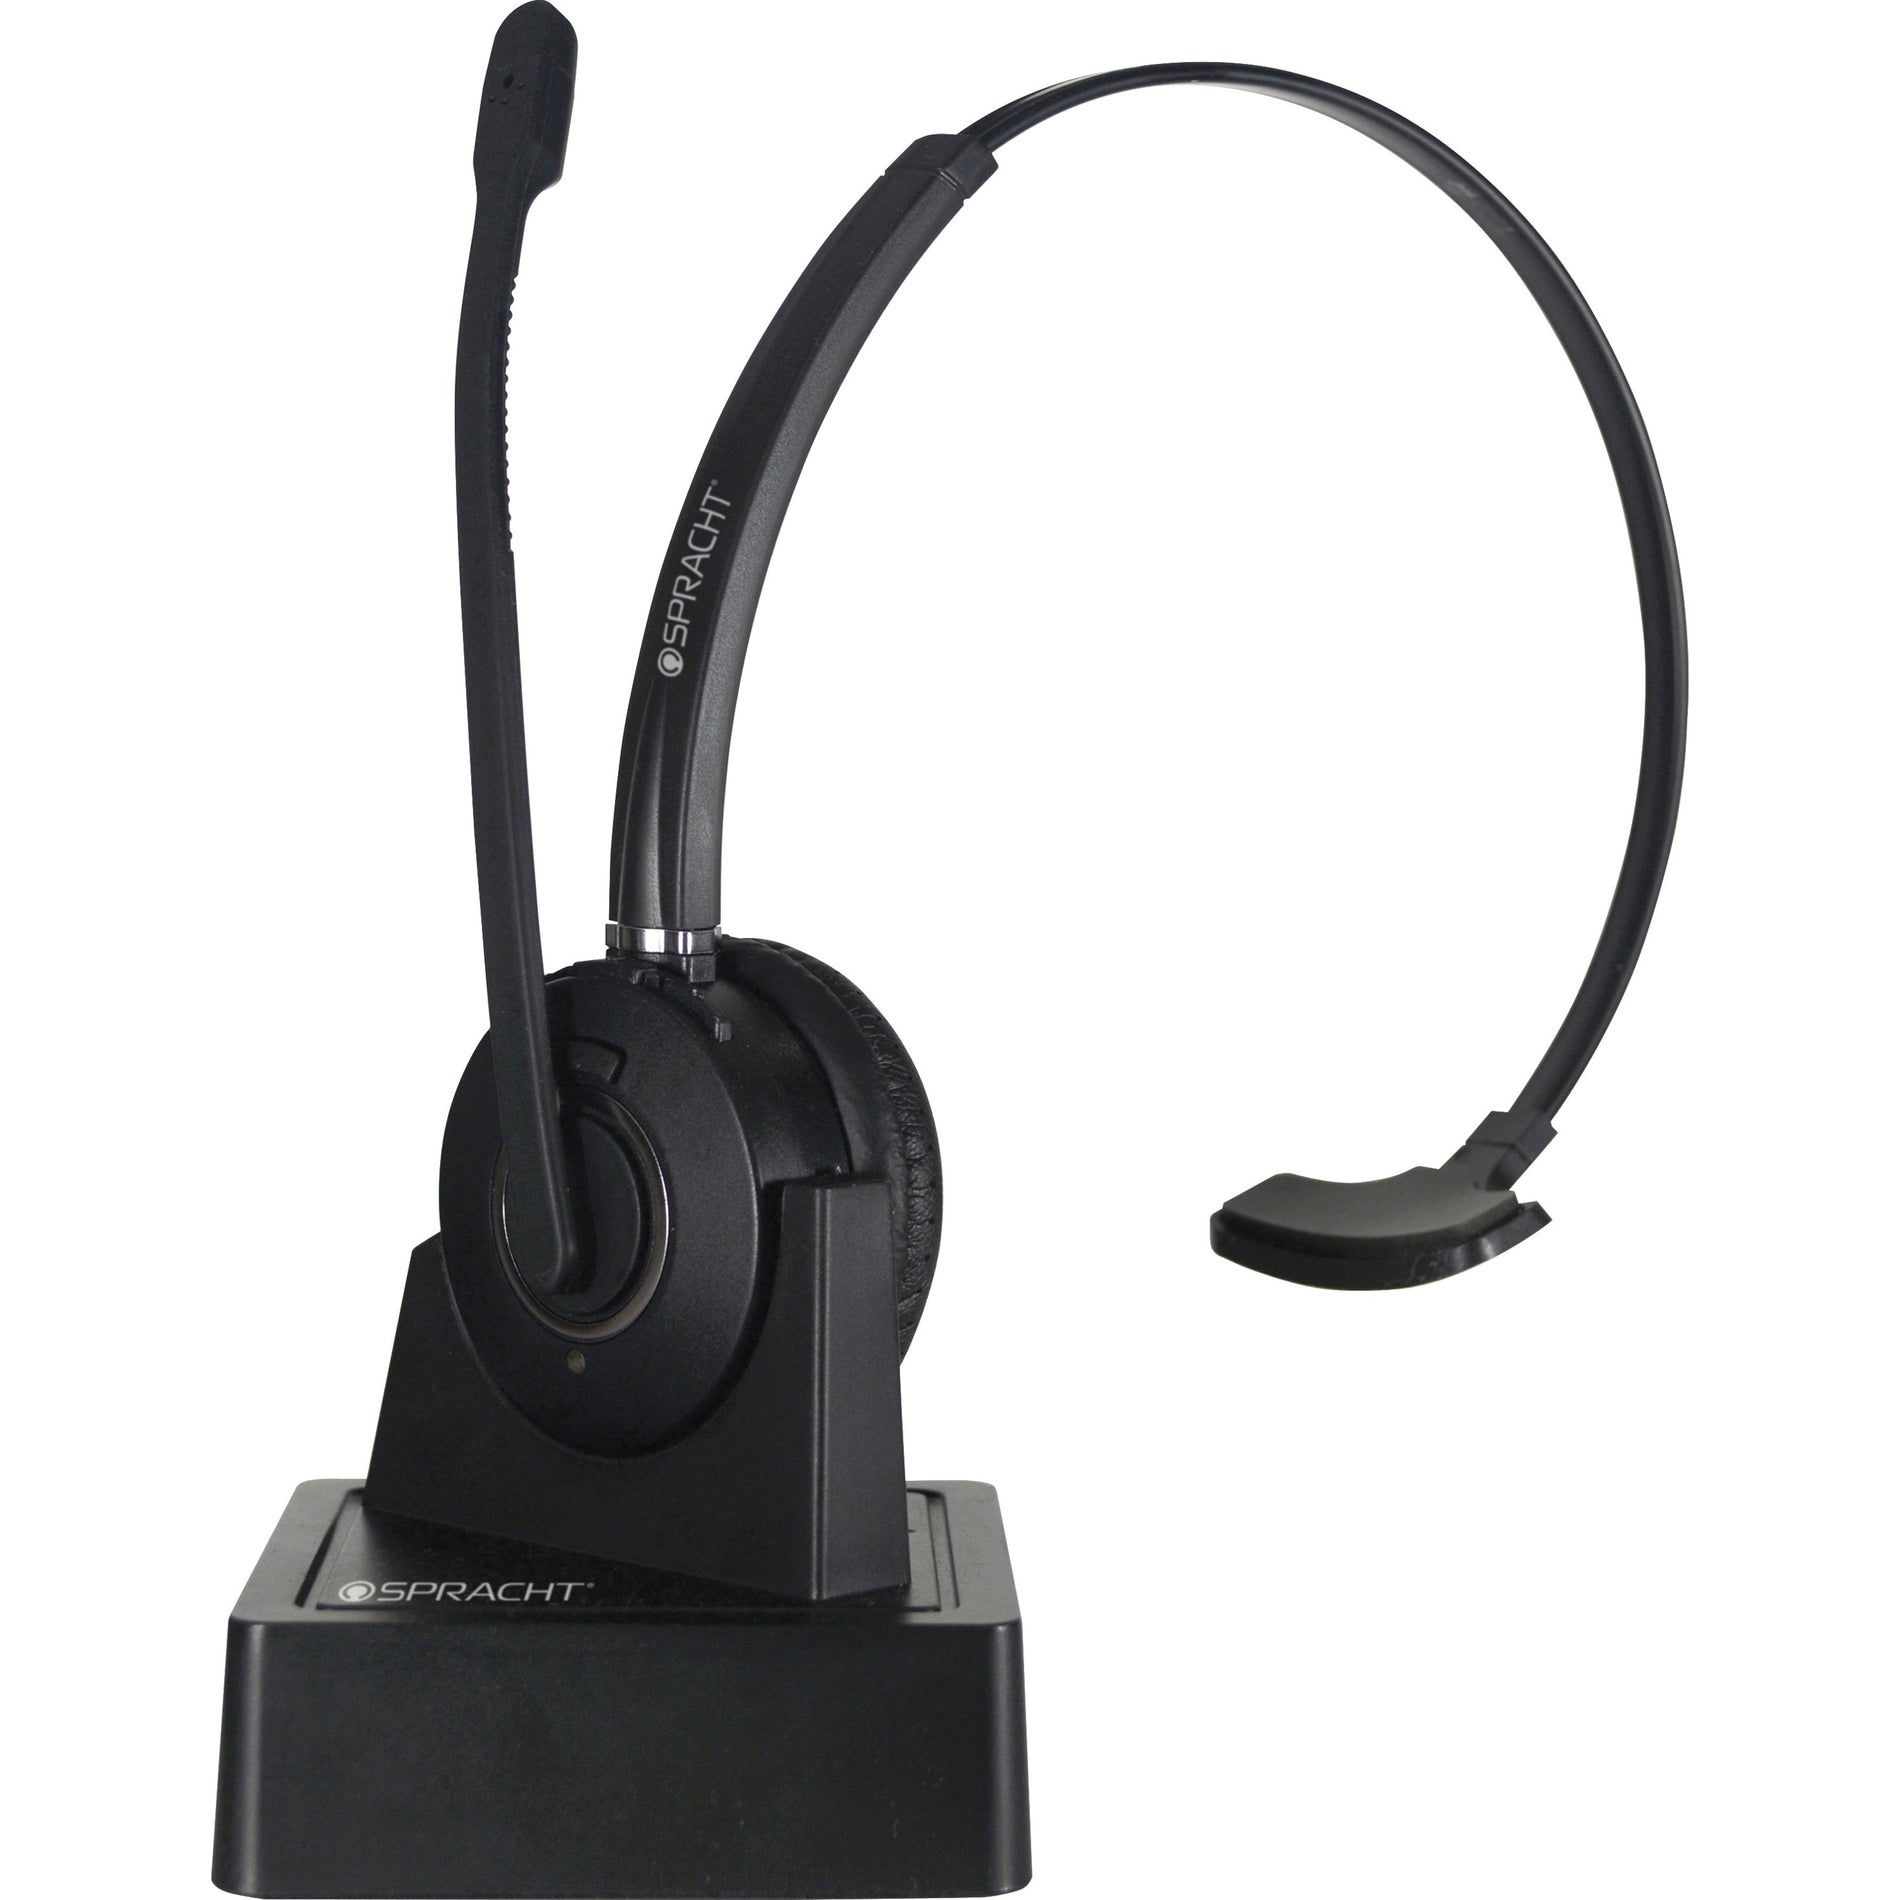 Spracht HS2060 ZUM COMBO Bluetooth/USB Wireless Headset + Base, Over-the-head Mono Headset with Noise Cancelling Microphone